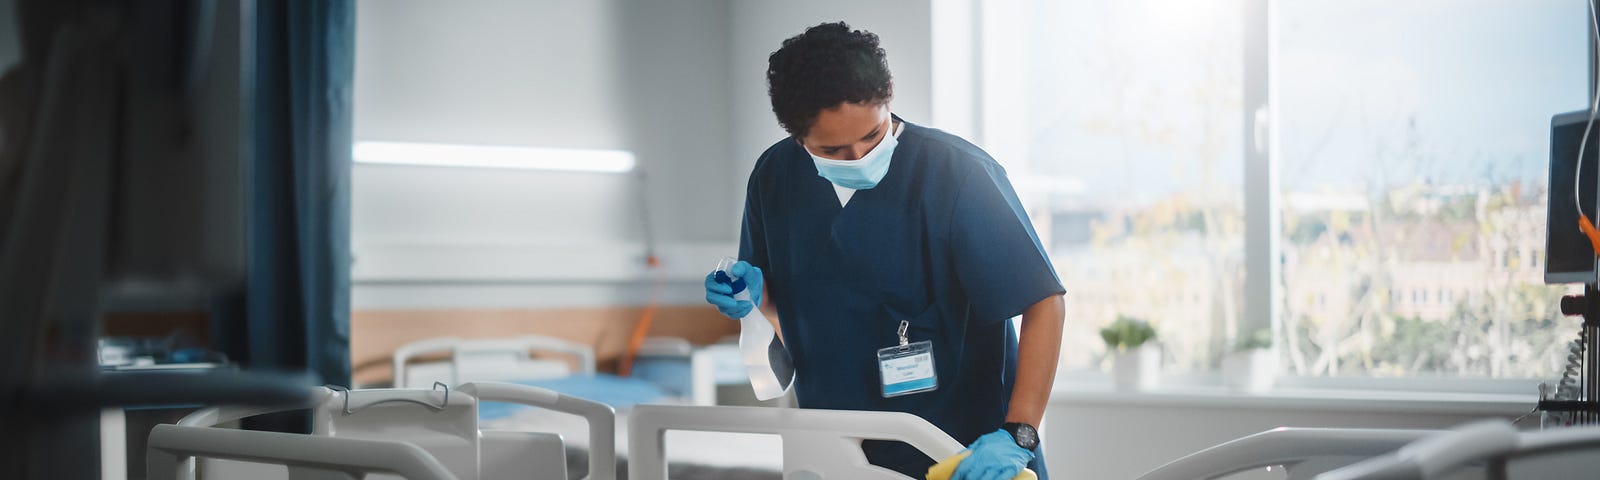 A masked and gloved health care worker disinfects a hospital bed.